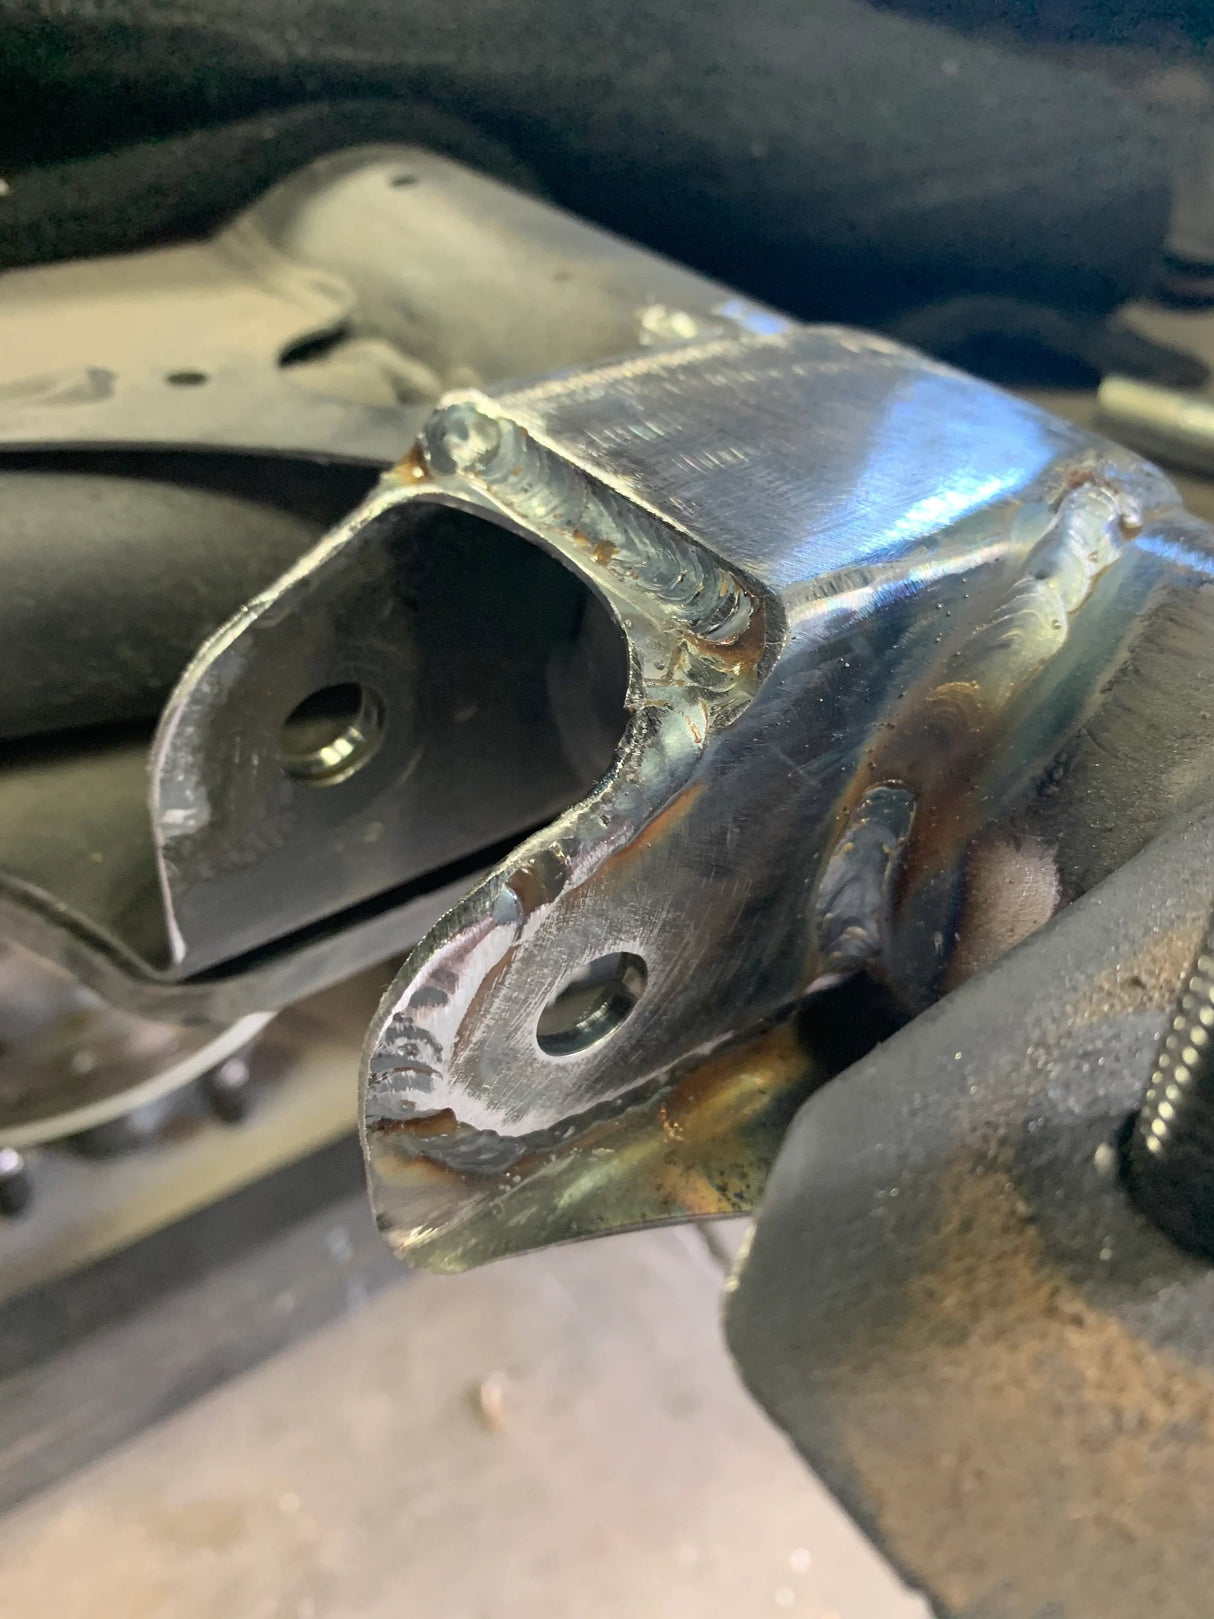 Can Am X3 Weld in trailing arm and rear shocktower brace - R1 Industries